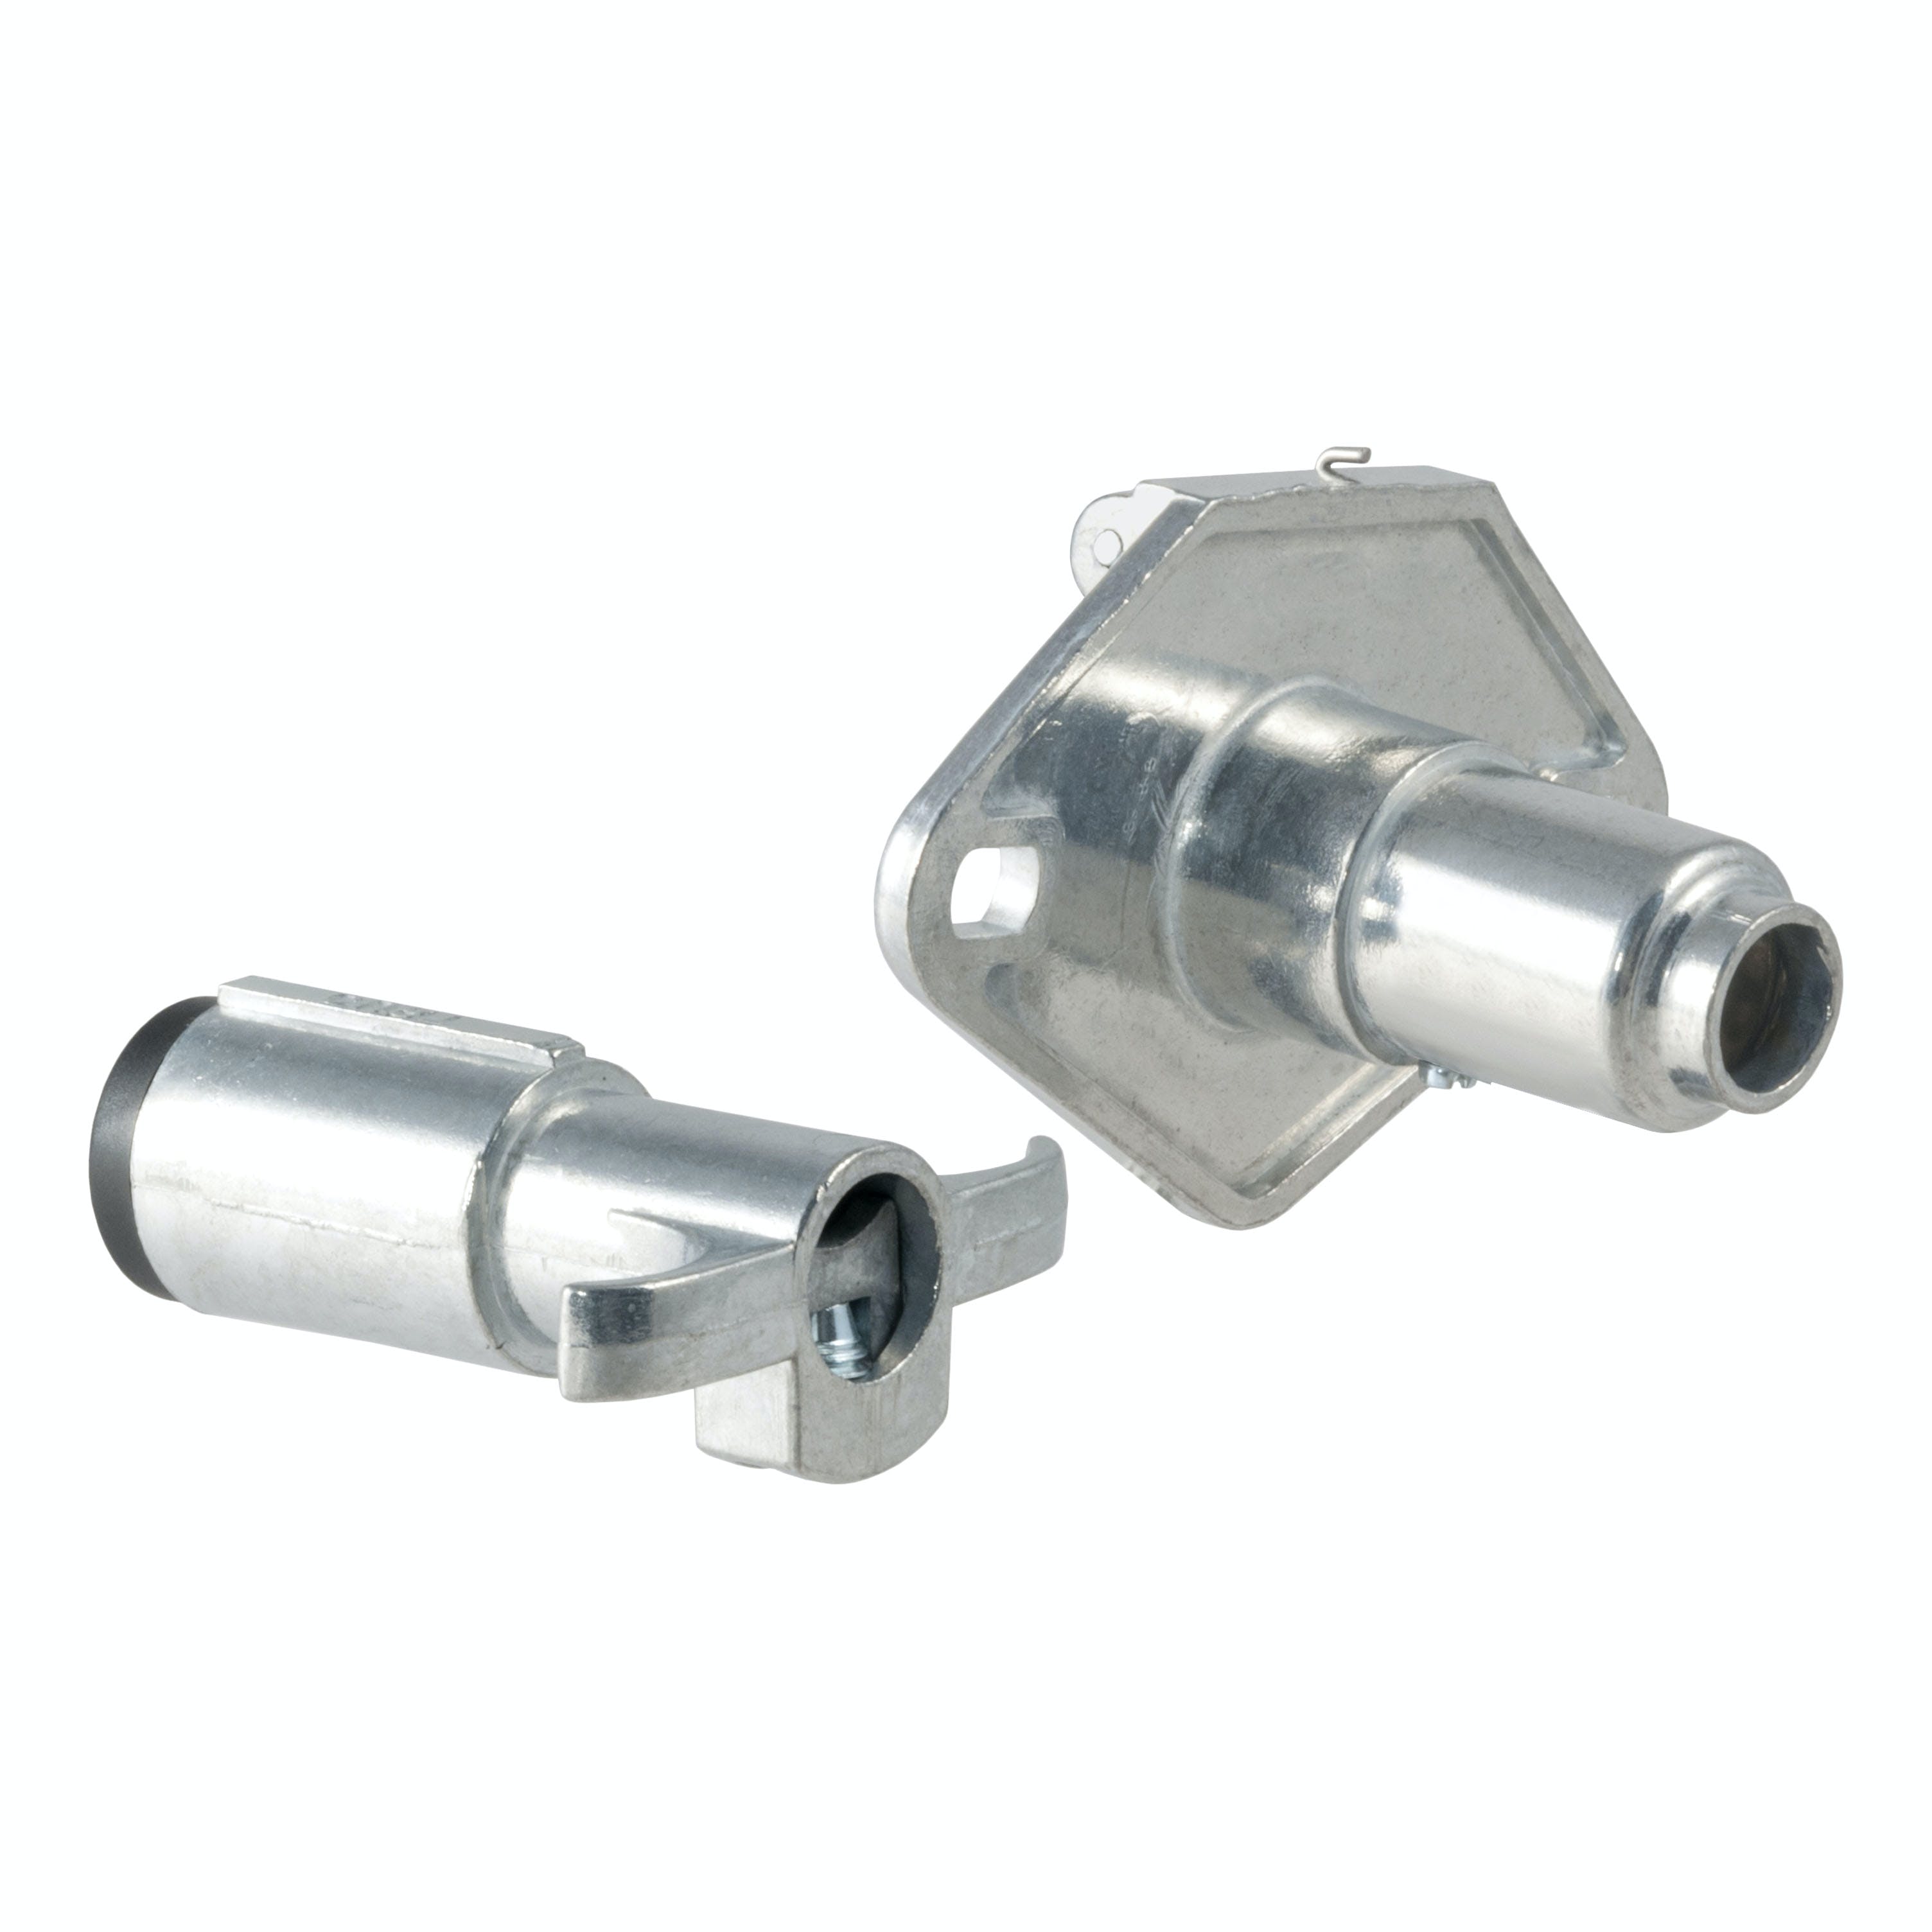 CURT 58092 6-Way Round Connector Plug and Socket (Packaged)